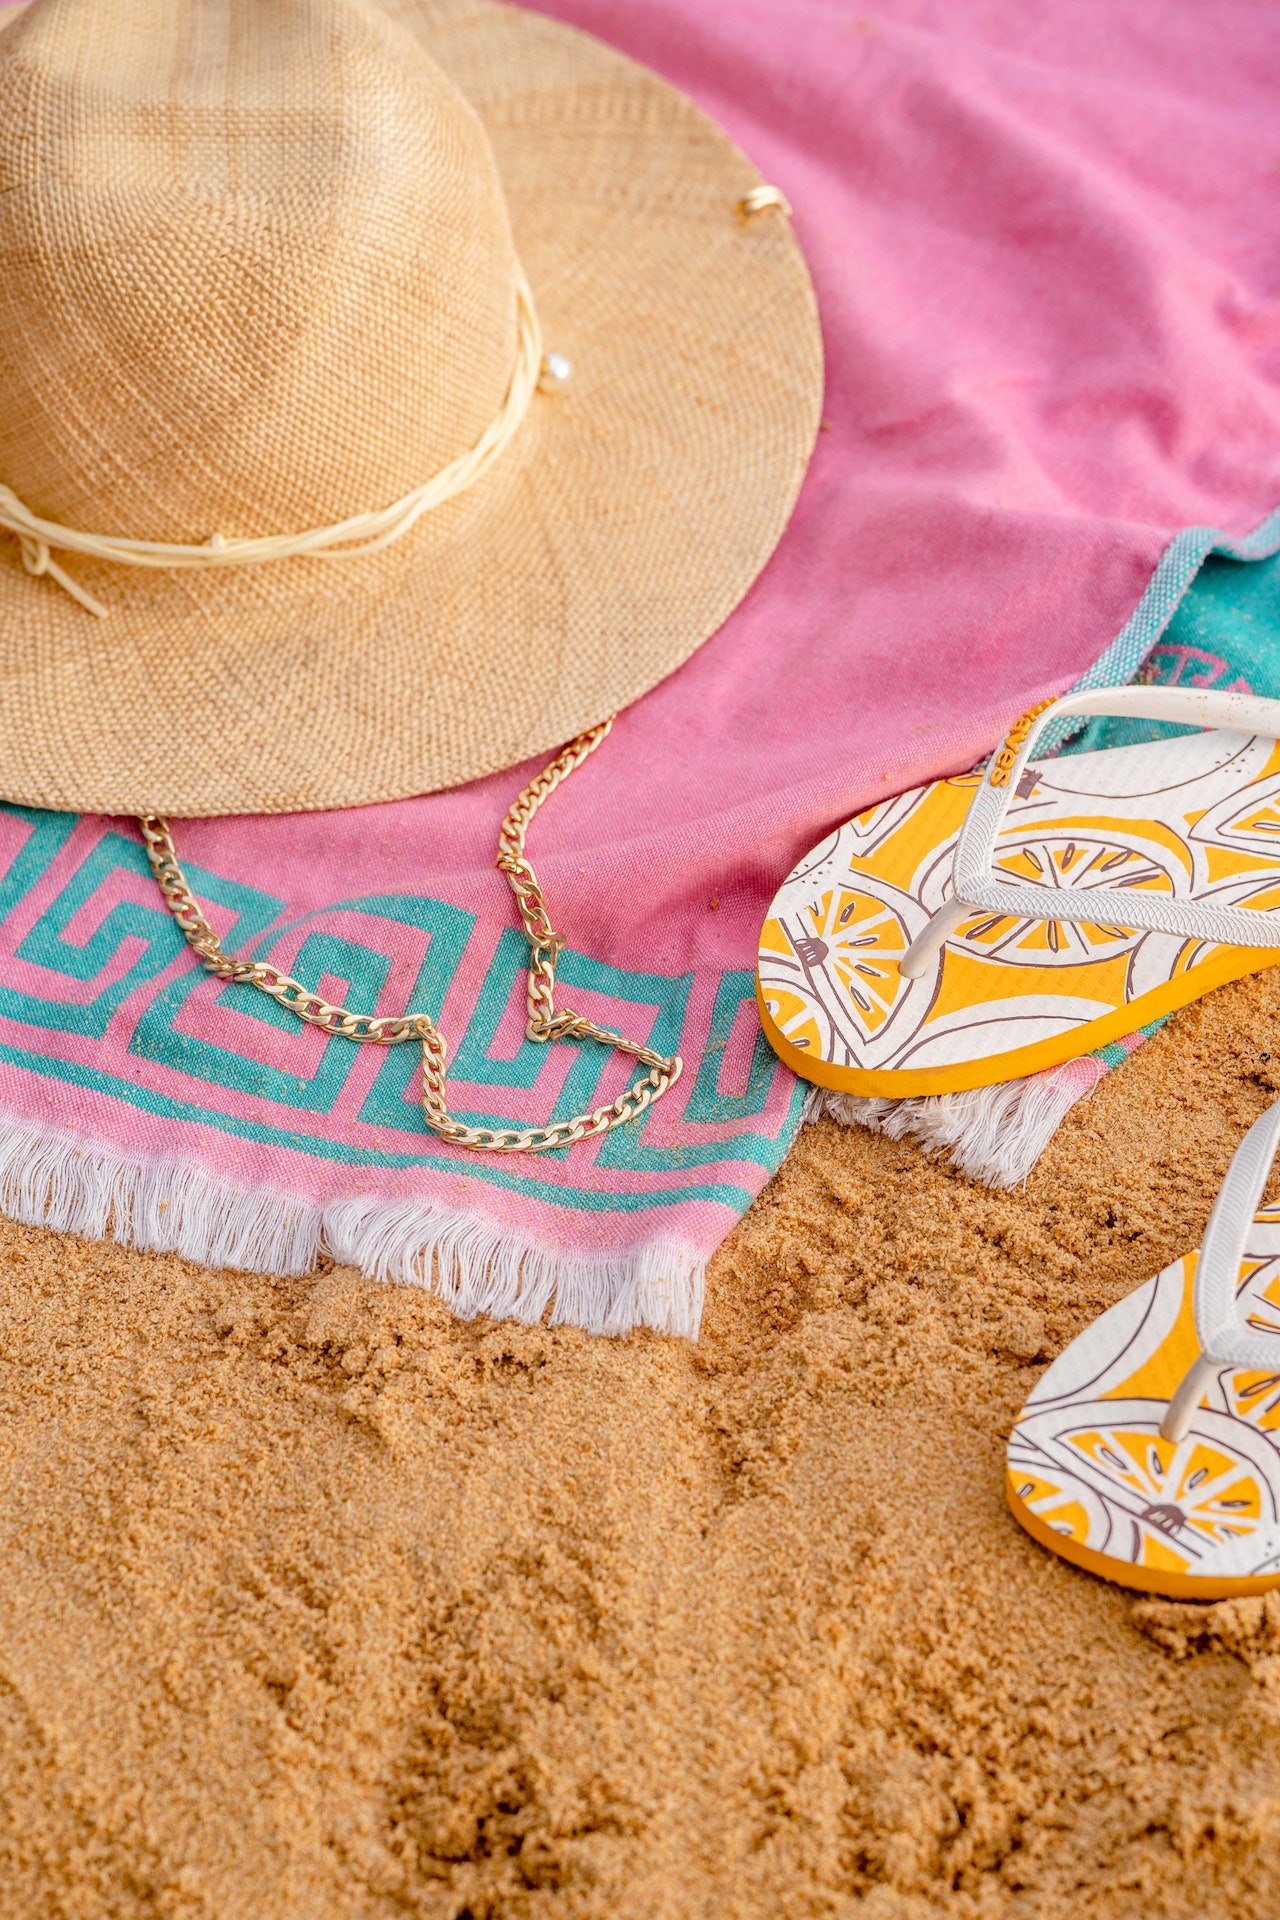 The Ultimate Beach Vacation Packing List: Top 9 Beach Bag Essentials You Can’t Forget